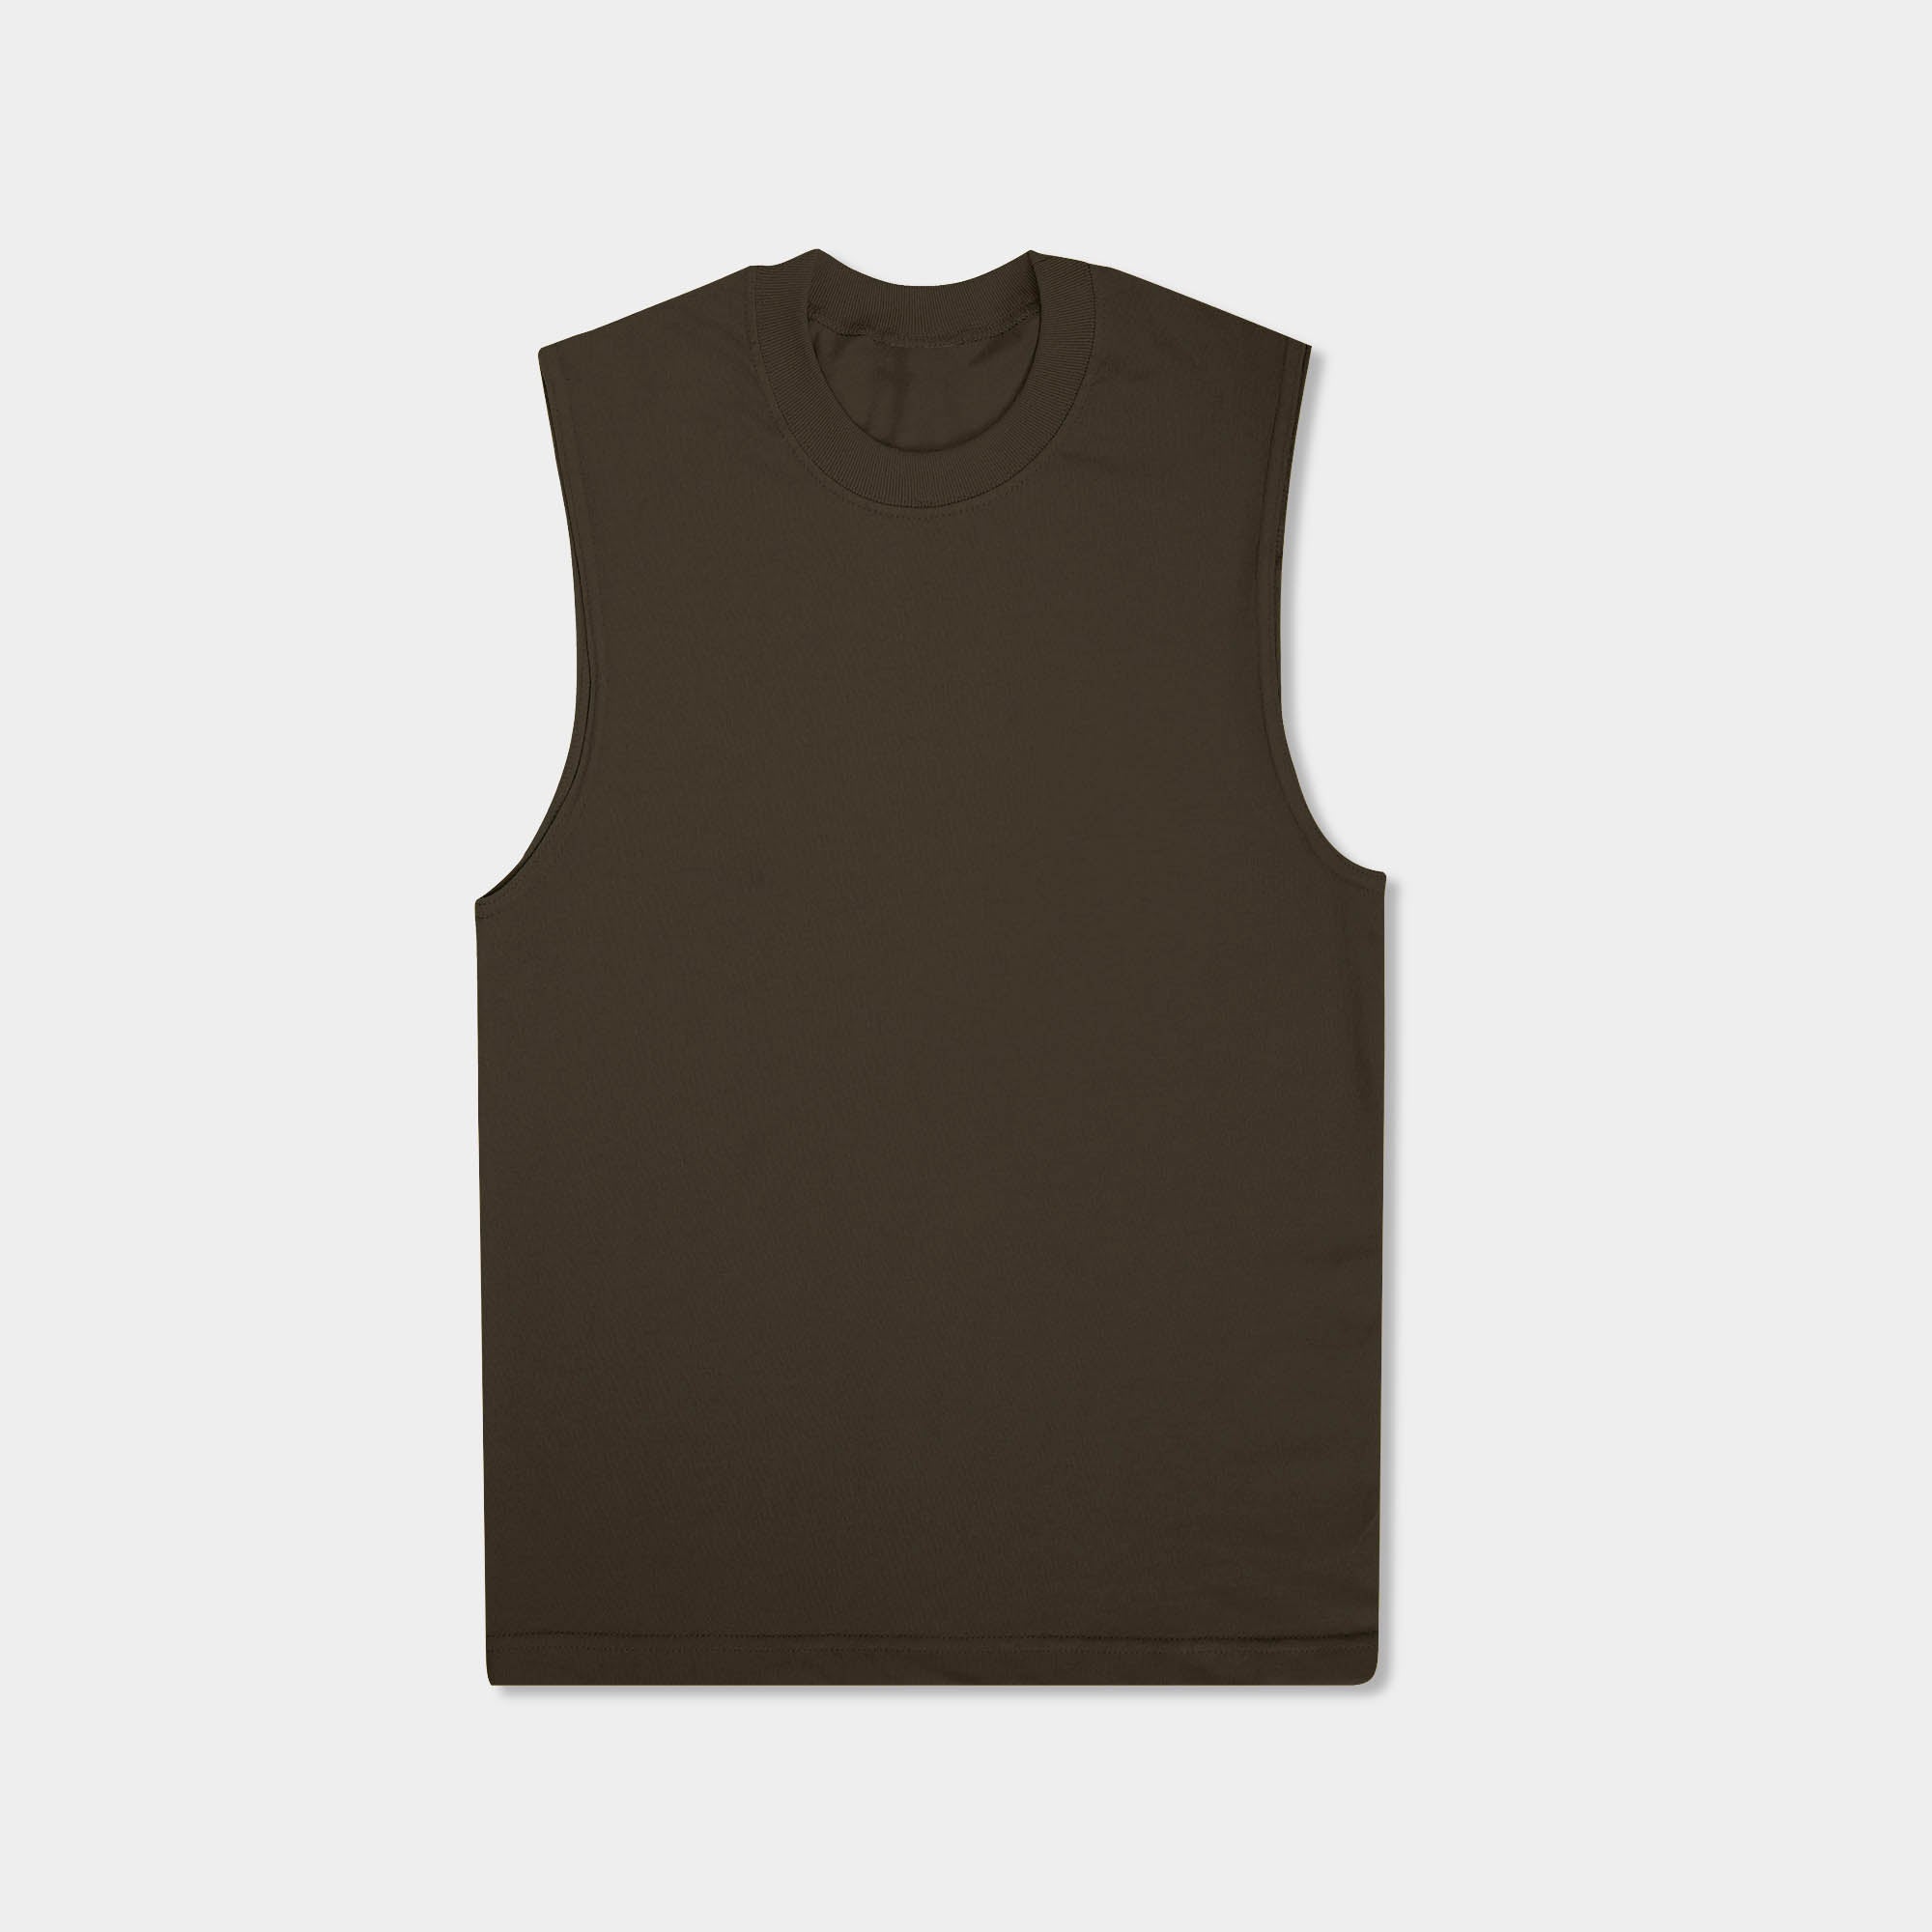 muscle tank_muscle tee_muscle tank tops_cropped muscle tank_under armour muscle shirt_insta slim tank_men muscle shirt_tank top_Dark Brown